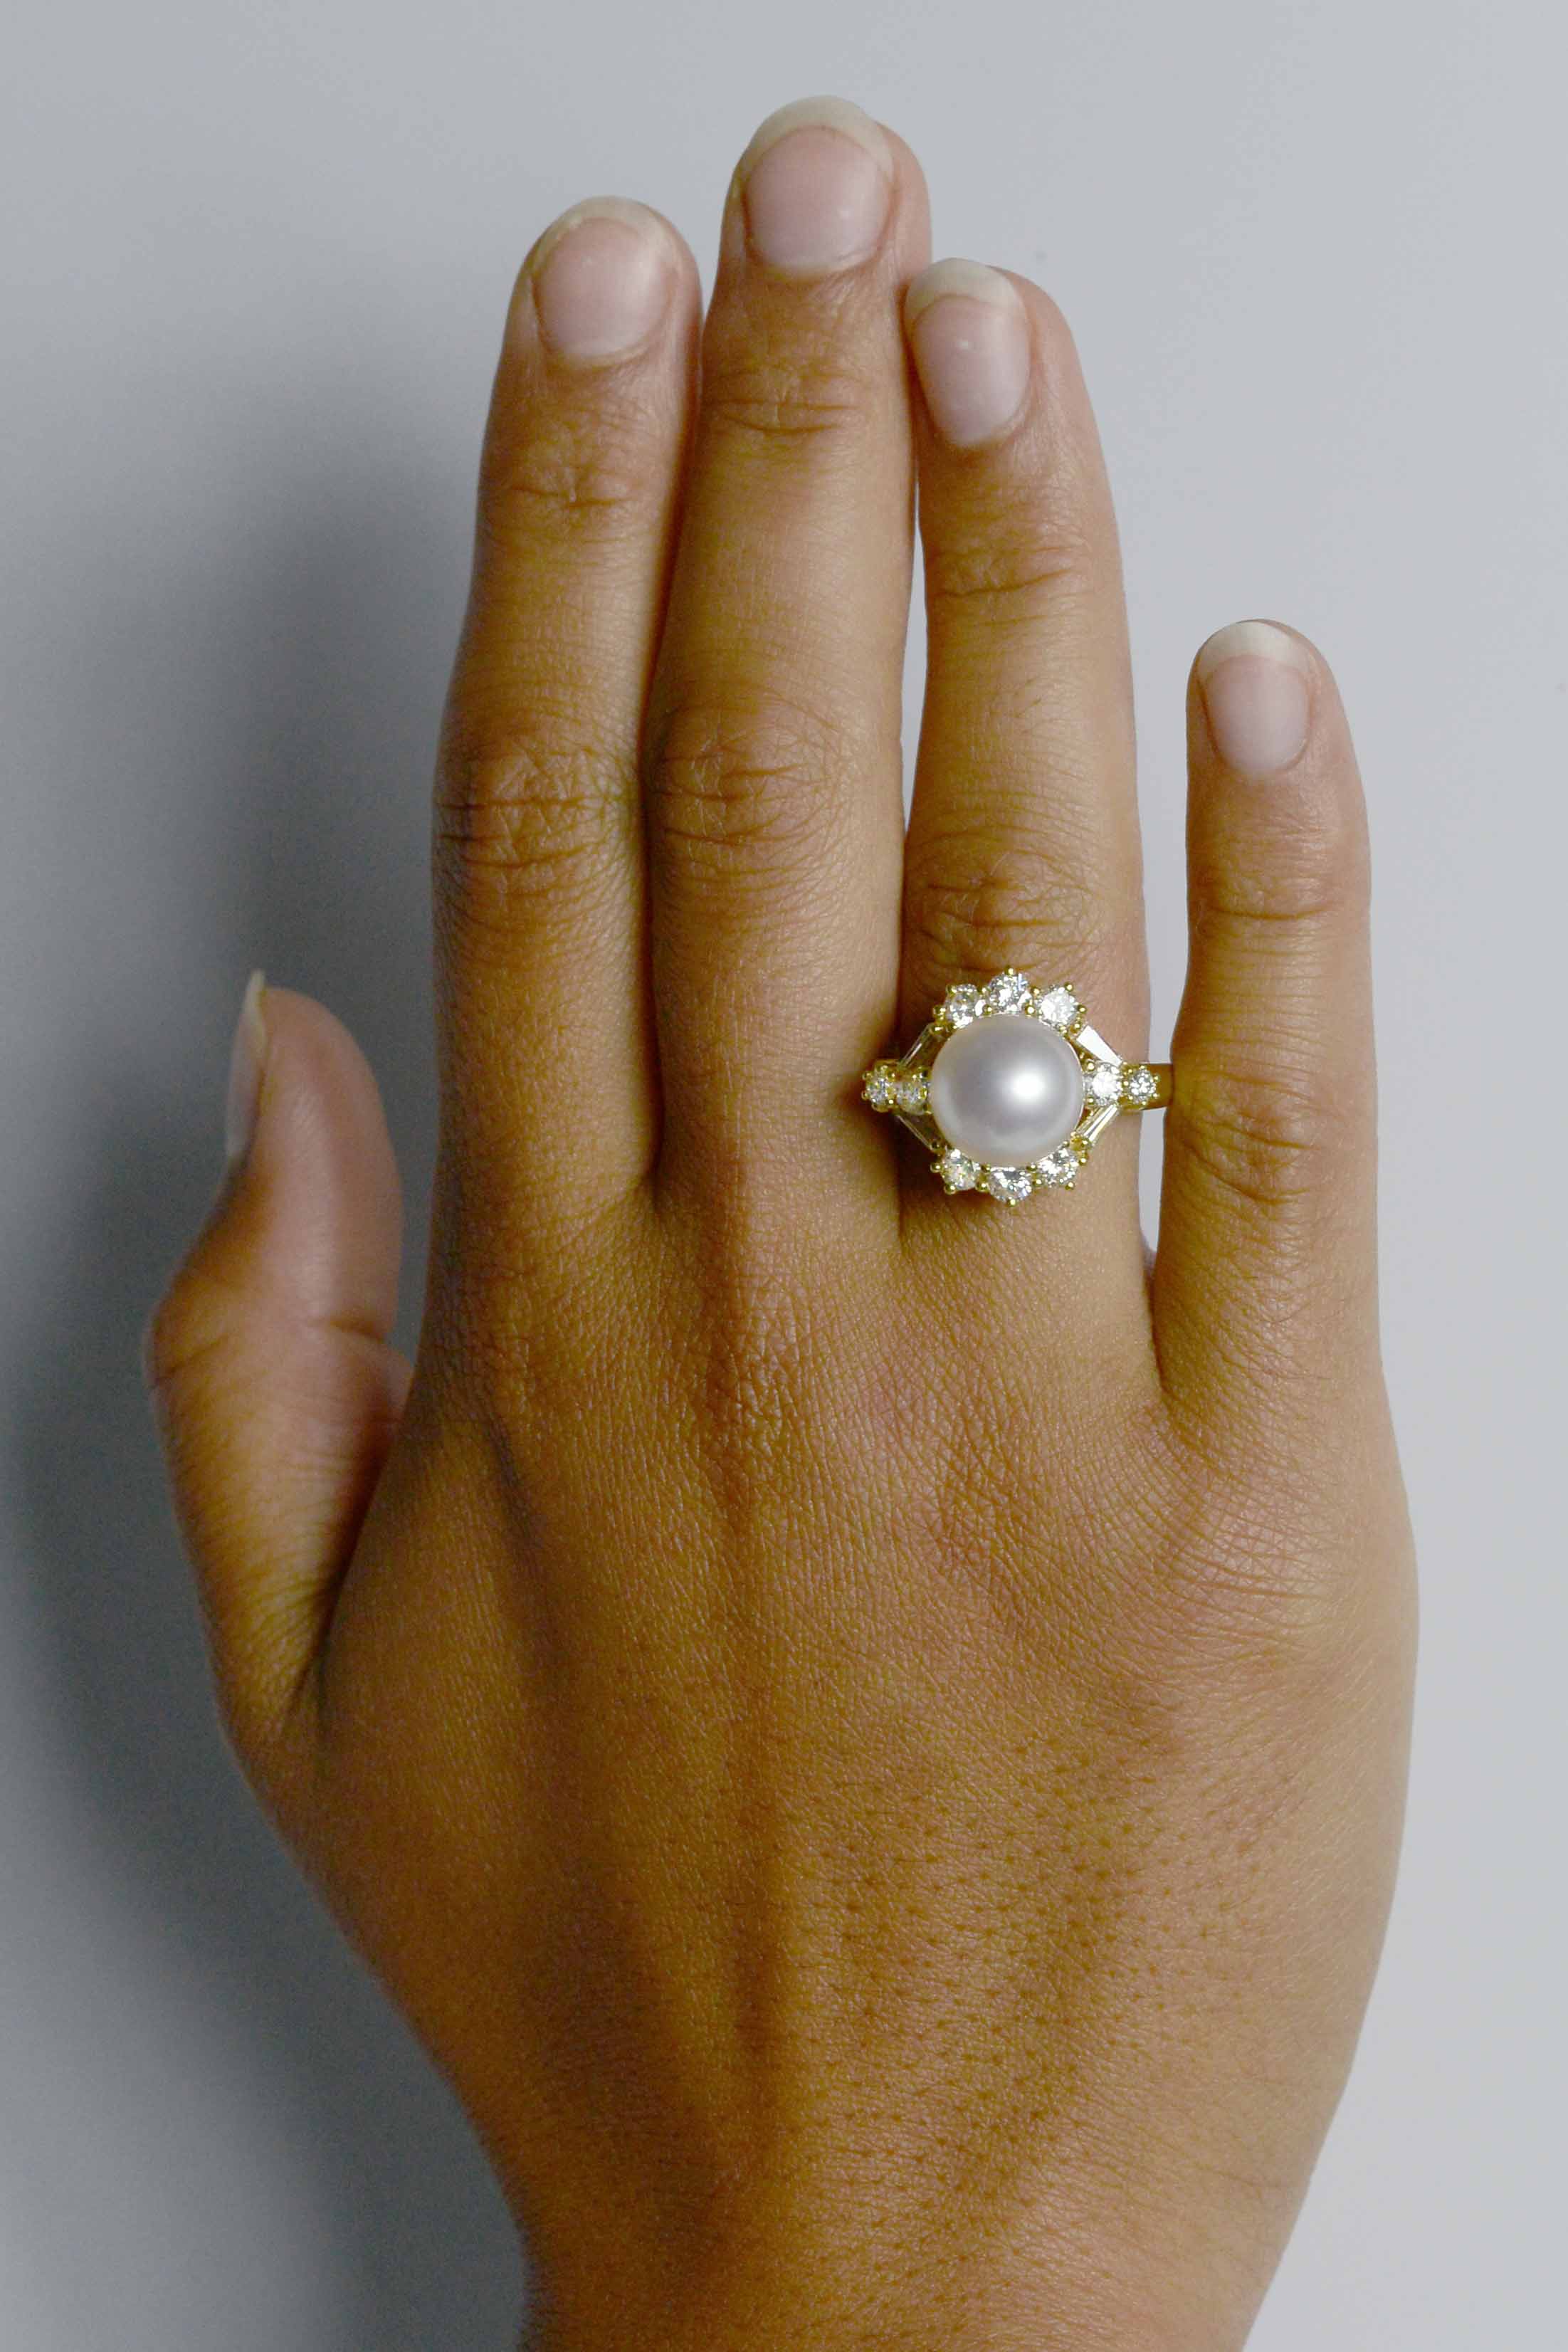 1 carat of diamonds create a halo around this modern natural pearl cocktail ring.